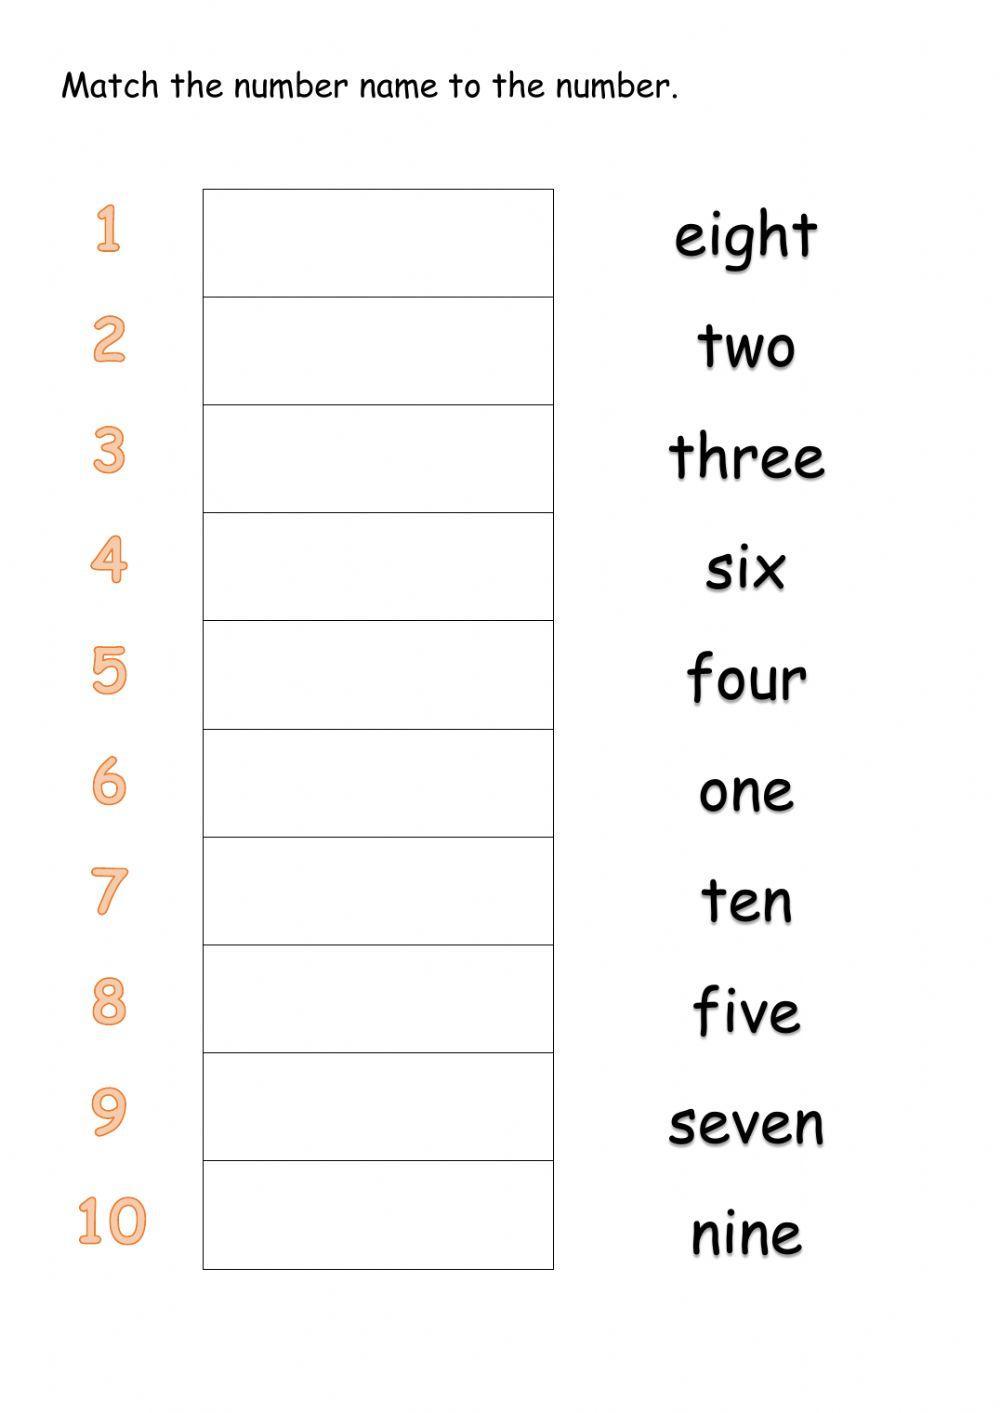 Matching Number Name to Numbers (1-10)